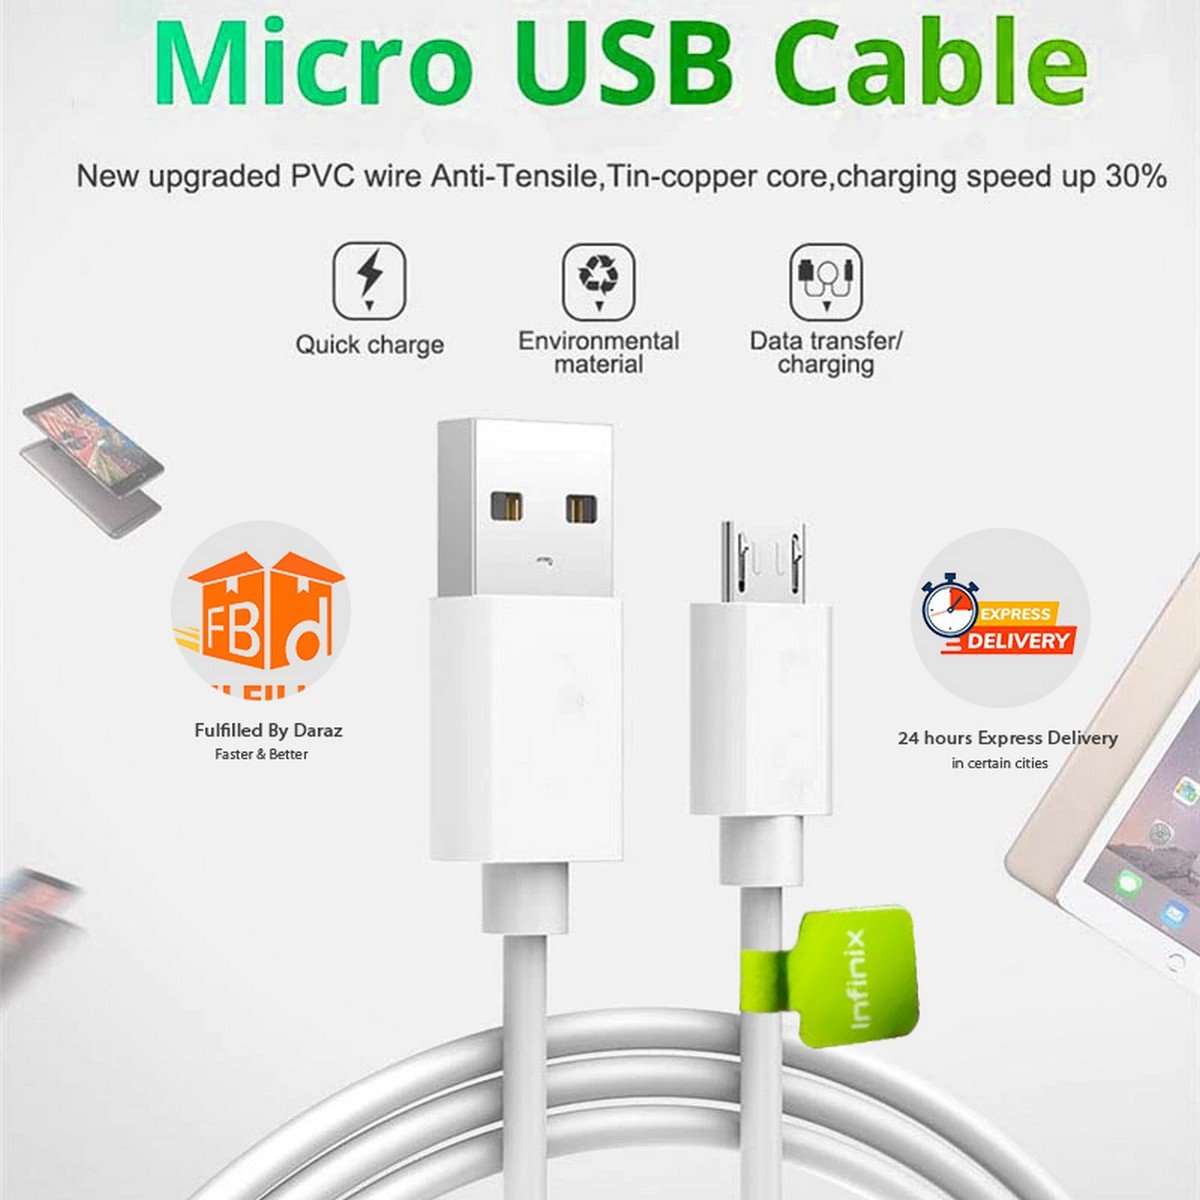 00% Original Infinix Micro USB Cable - White- Fast Charging Cable For Android Mobile Phones